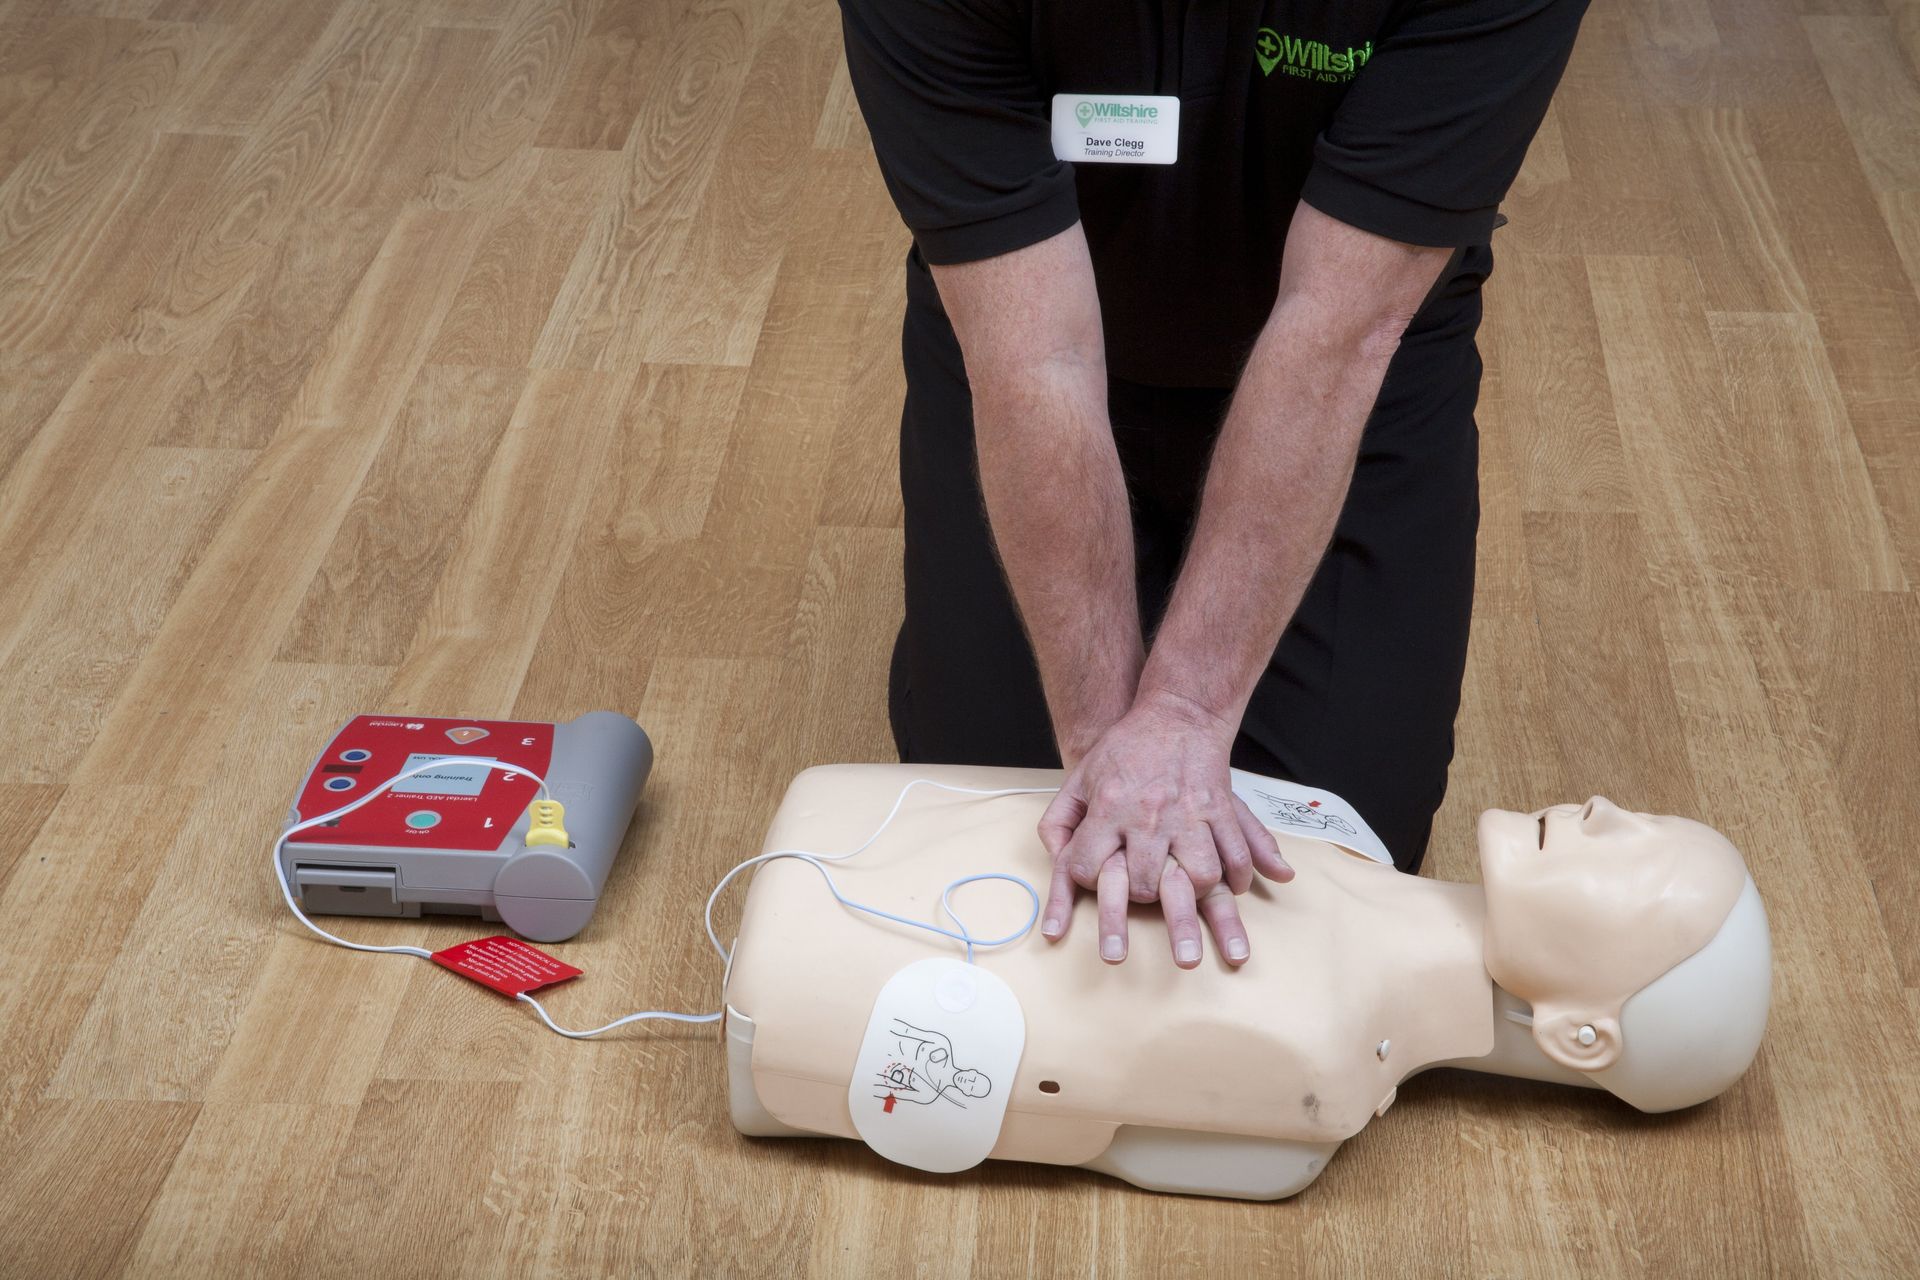 UK Providers of Basic Life Support Refresher Course